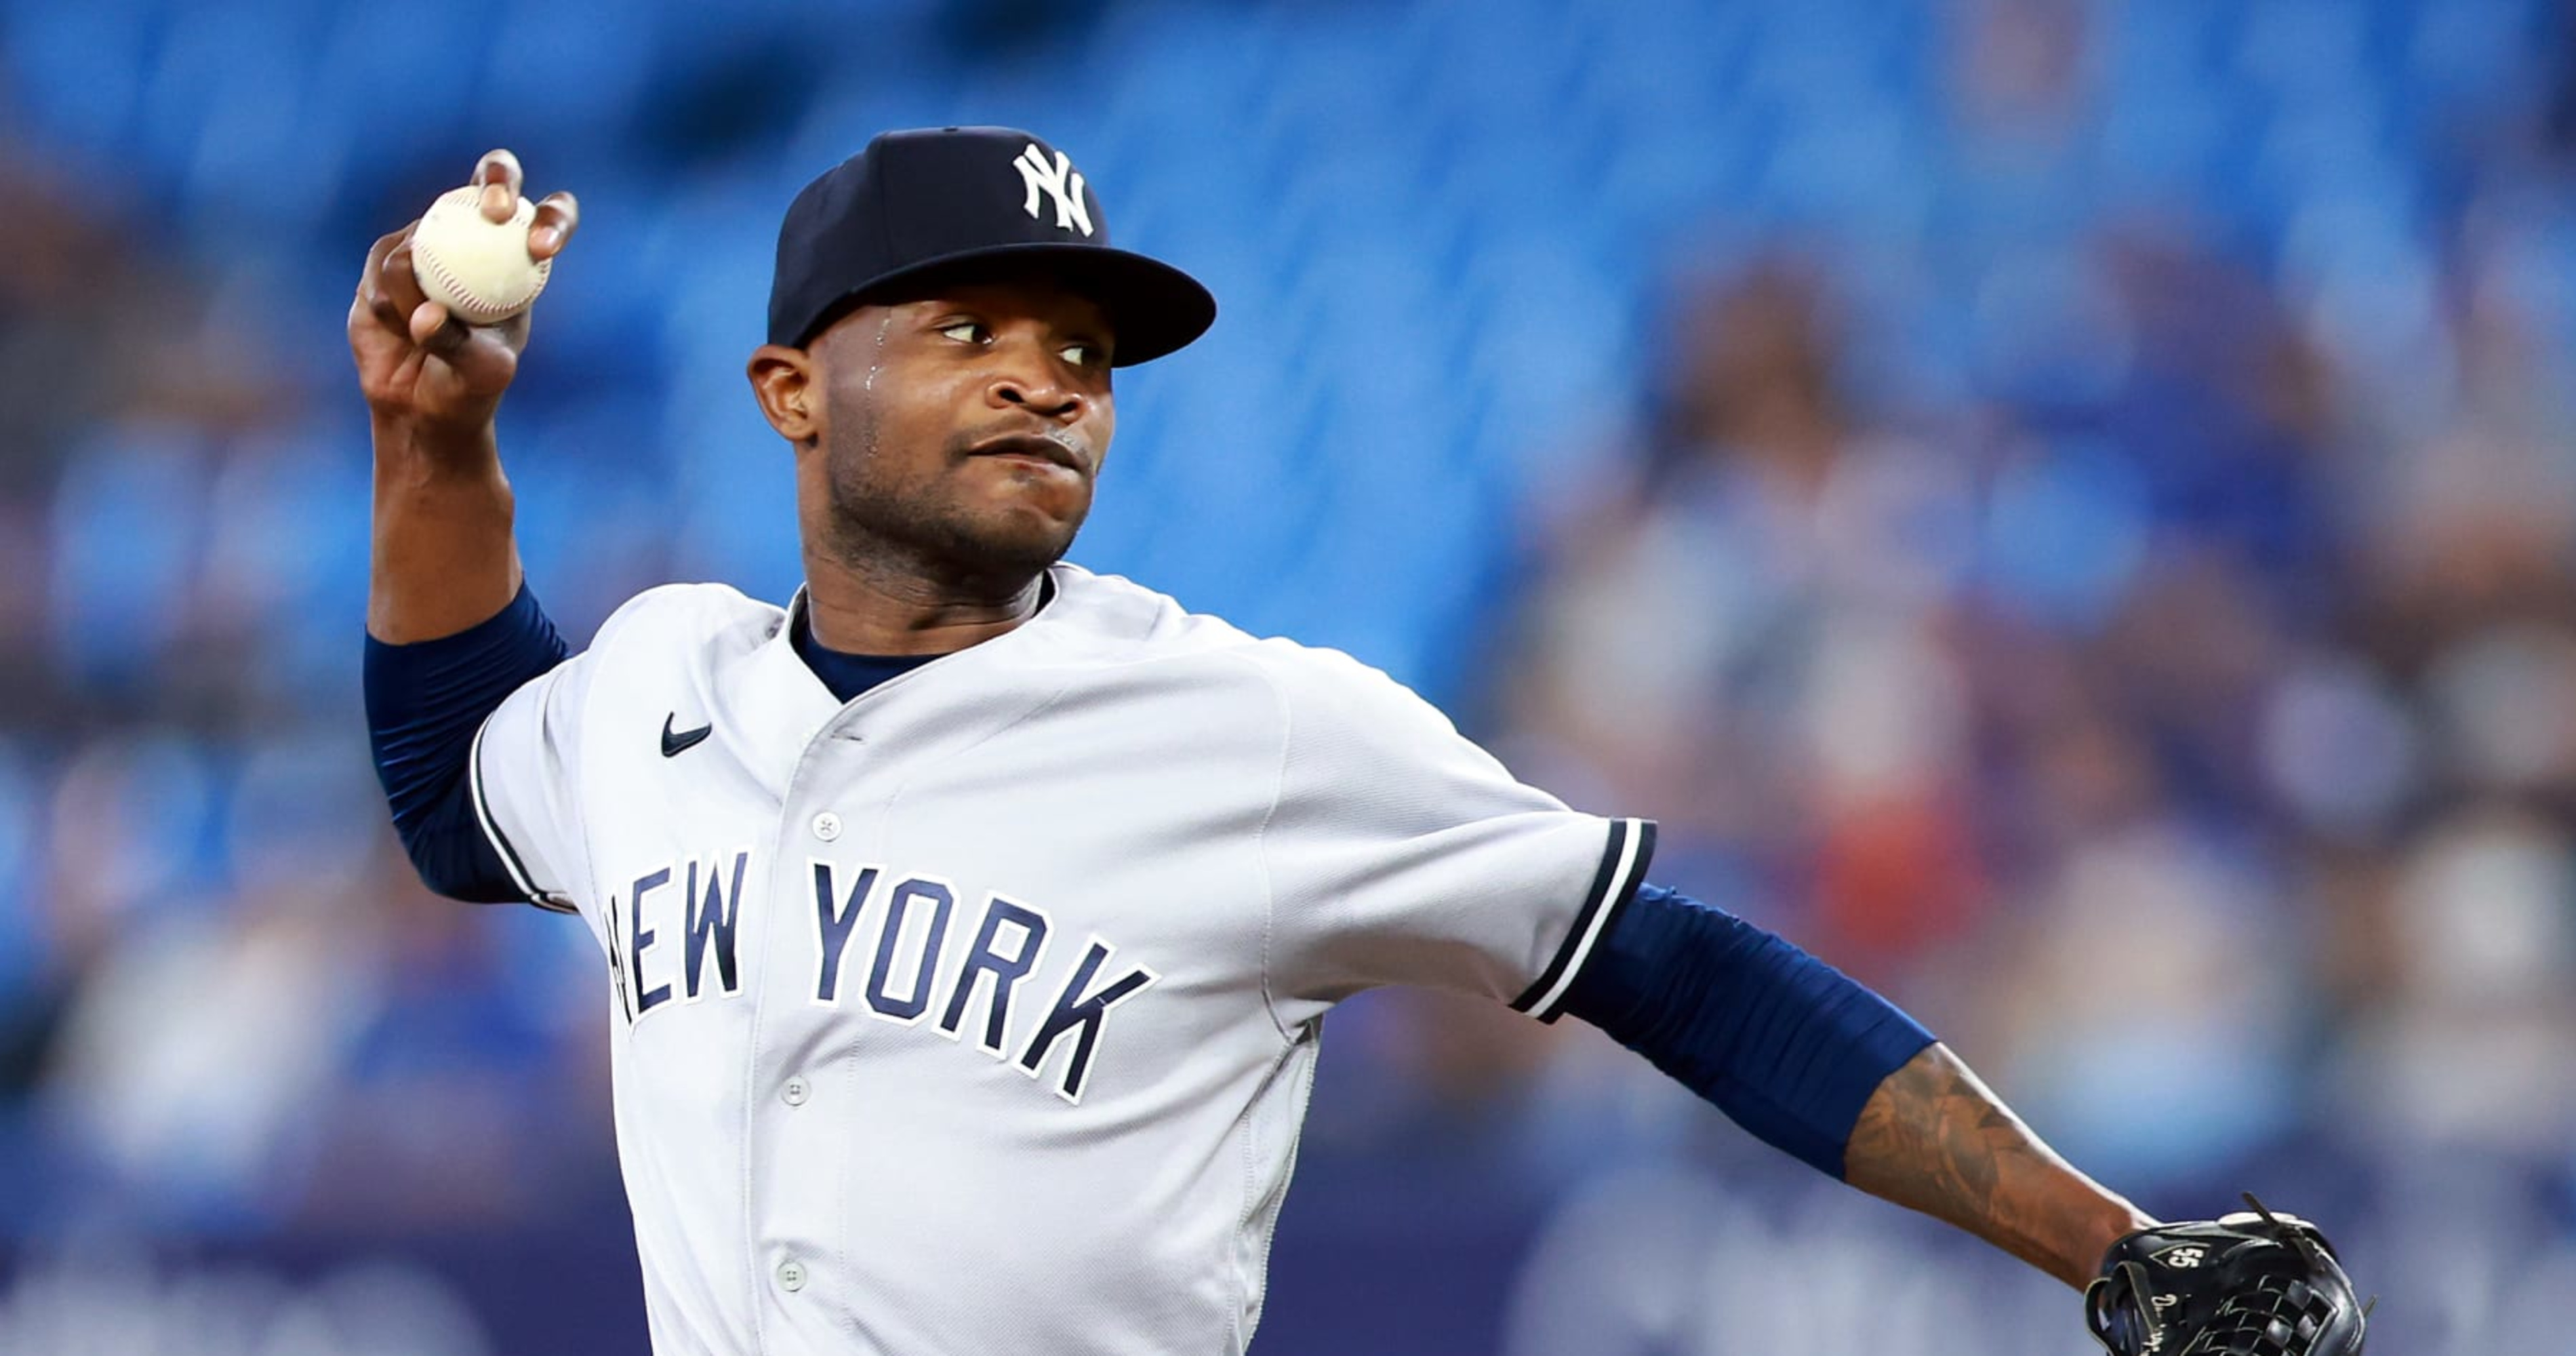 Yankees pitcher Domingo Germán suspended 10 games by MLB